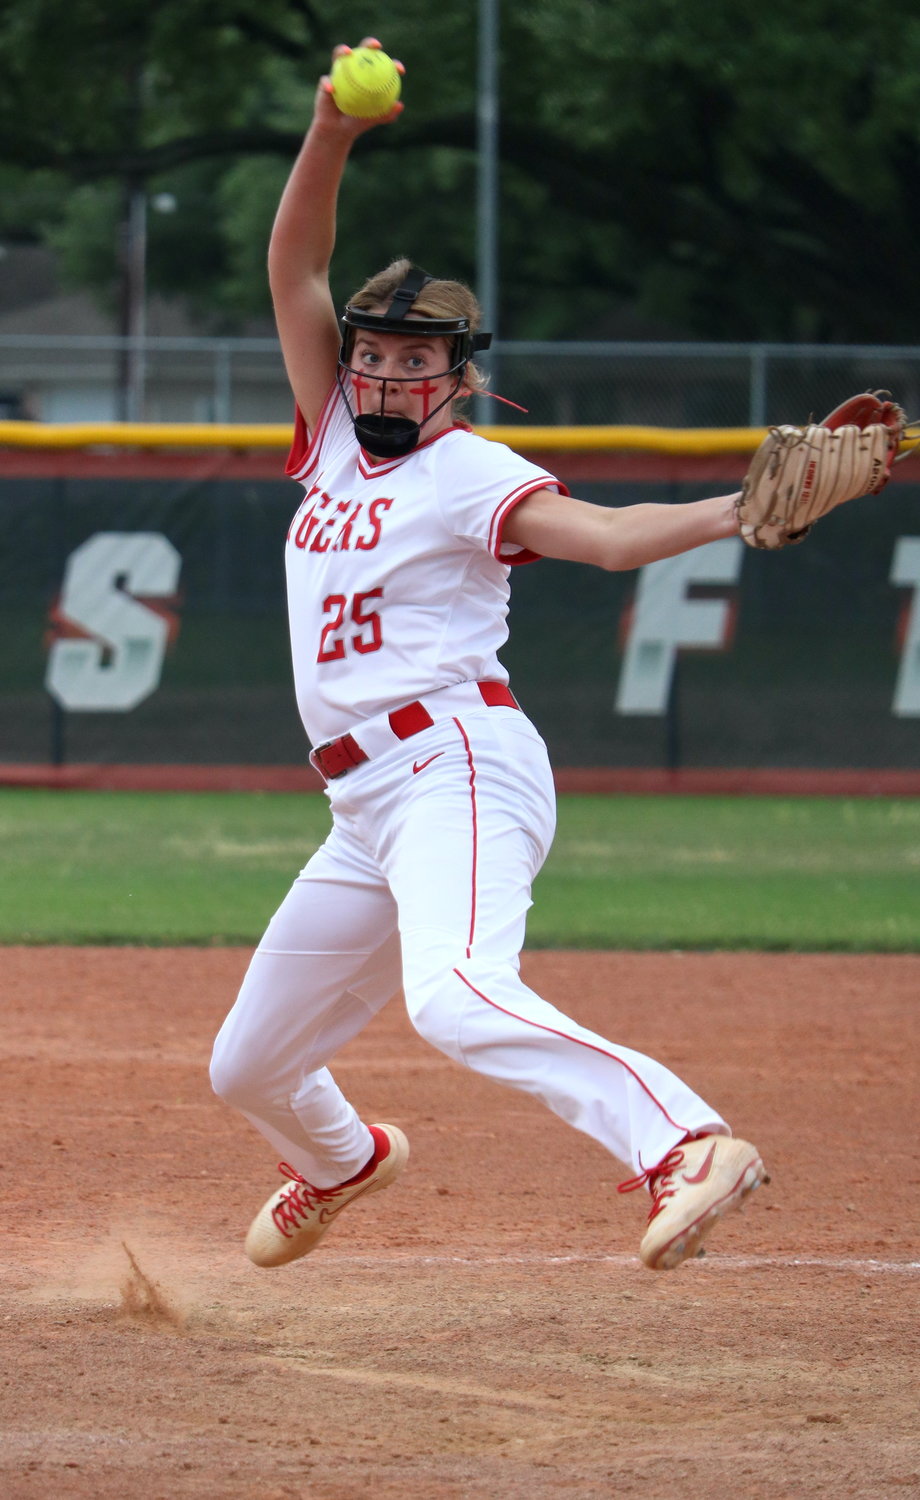 Cameryn Harrison pitches during Tuesday’s game between Katy and Taylor at the Katy softball field.